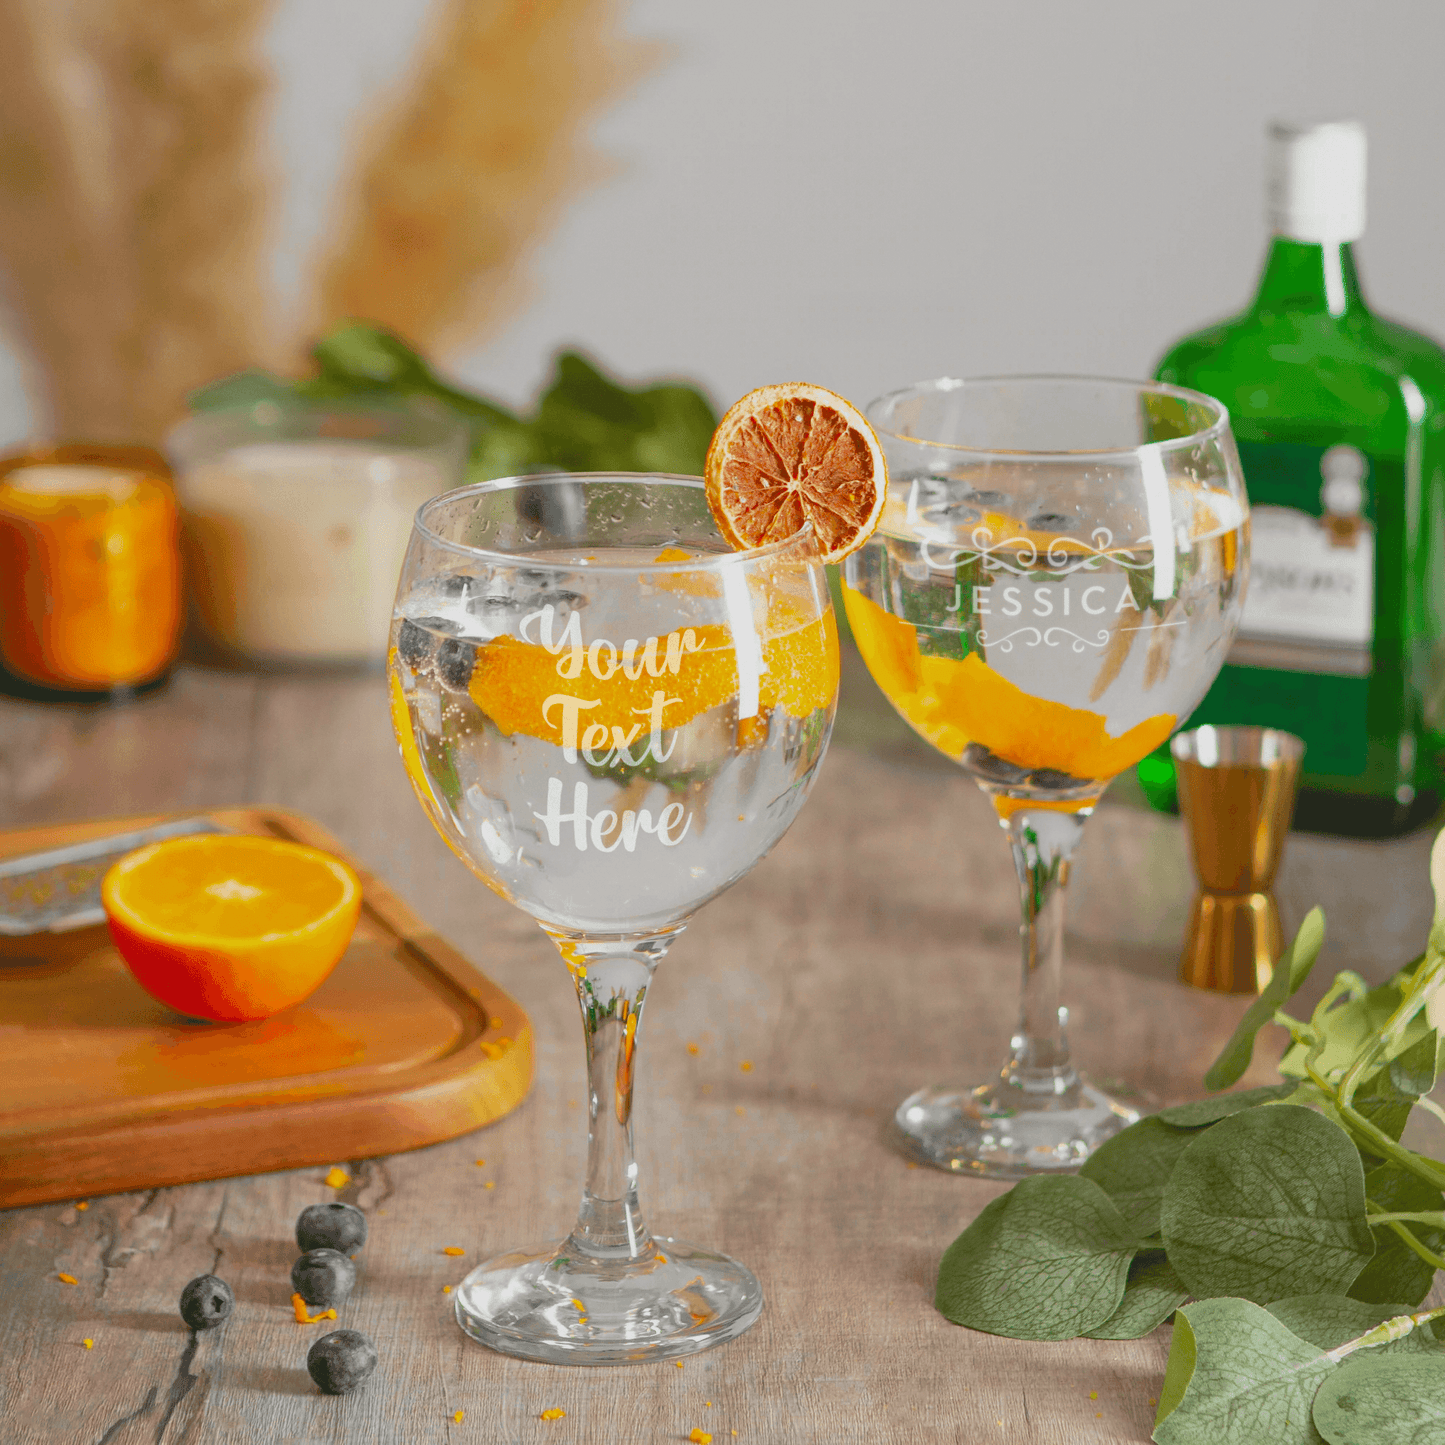 Personalised Engraved Gin Glass - So Bespoke Gifts